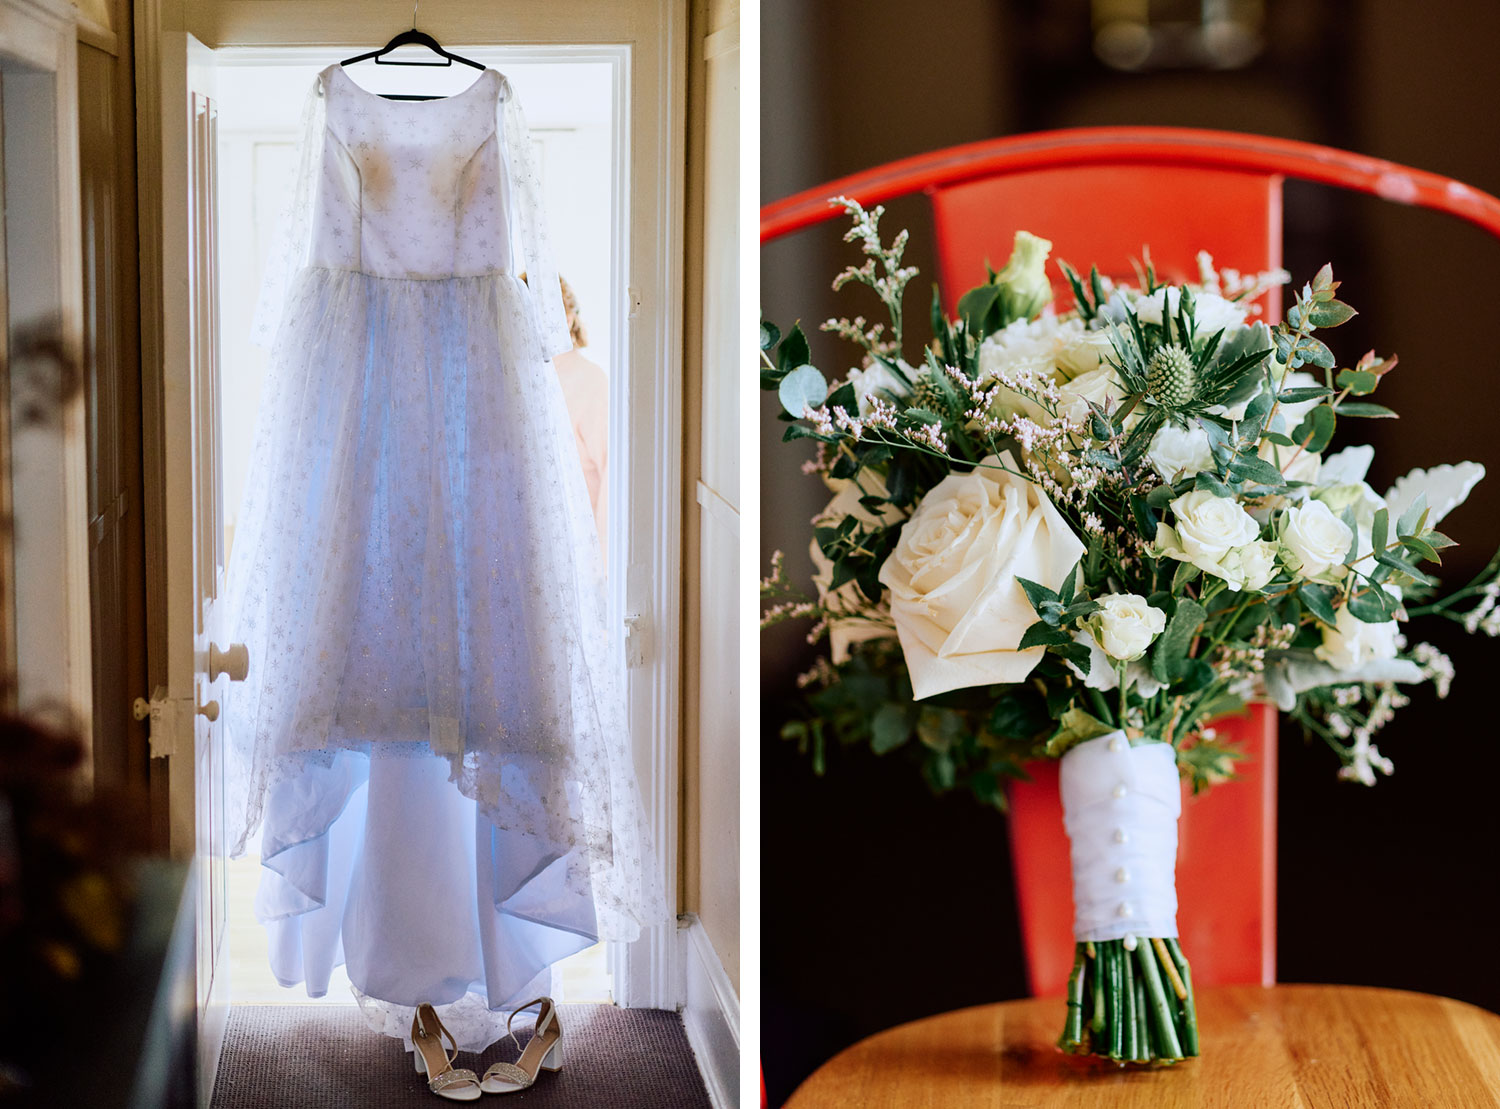 Bride's dress and flowers